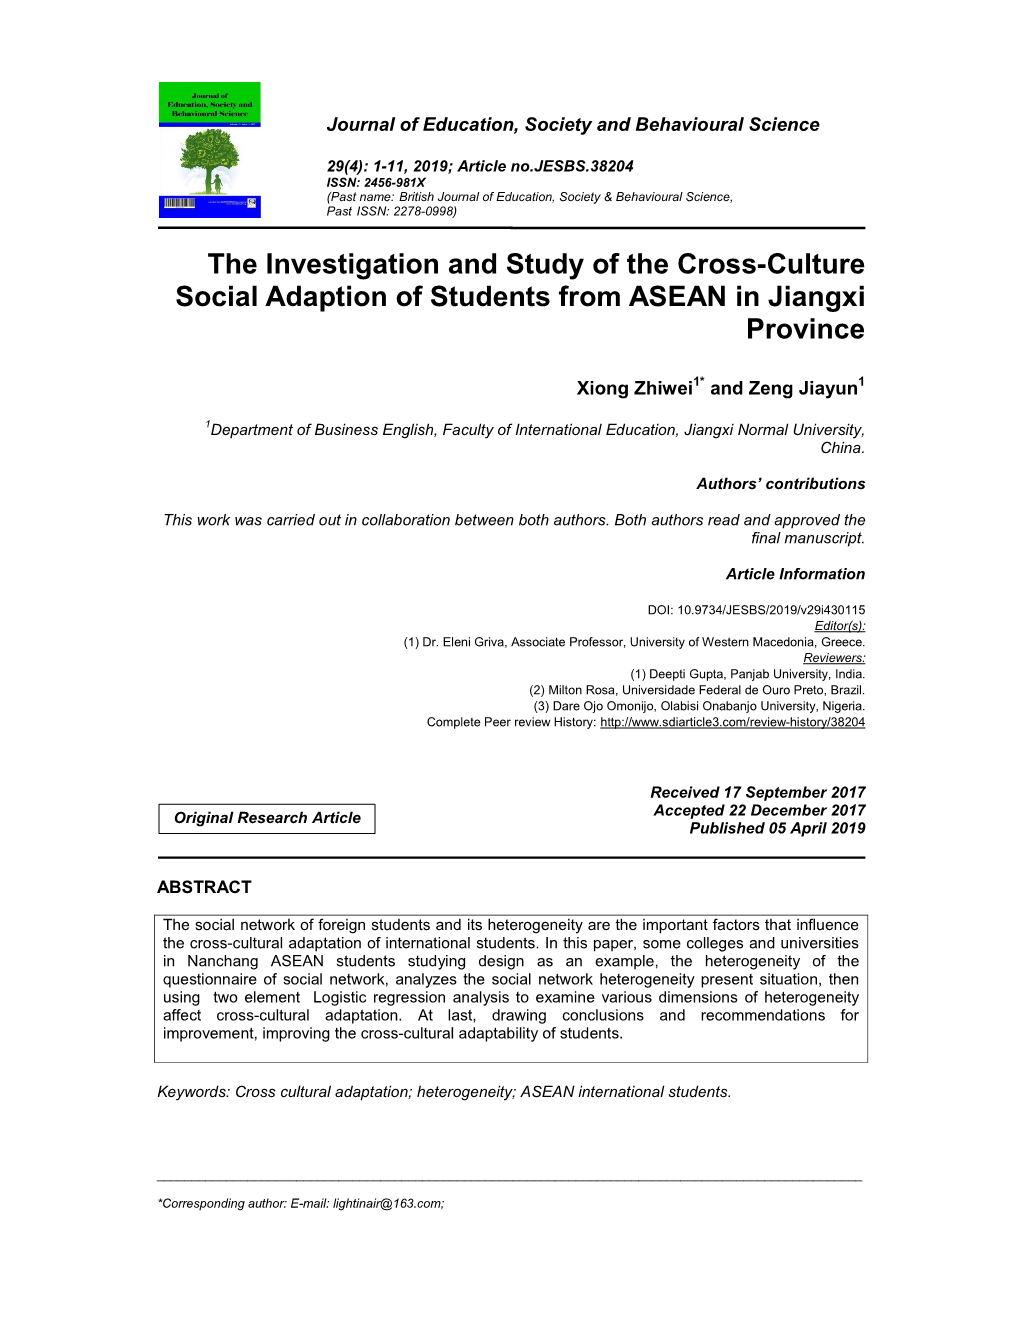 The Investigation and Study of the Cross-Culture Social Adaption of Students from ASEAN in Jiangxi Province